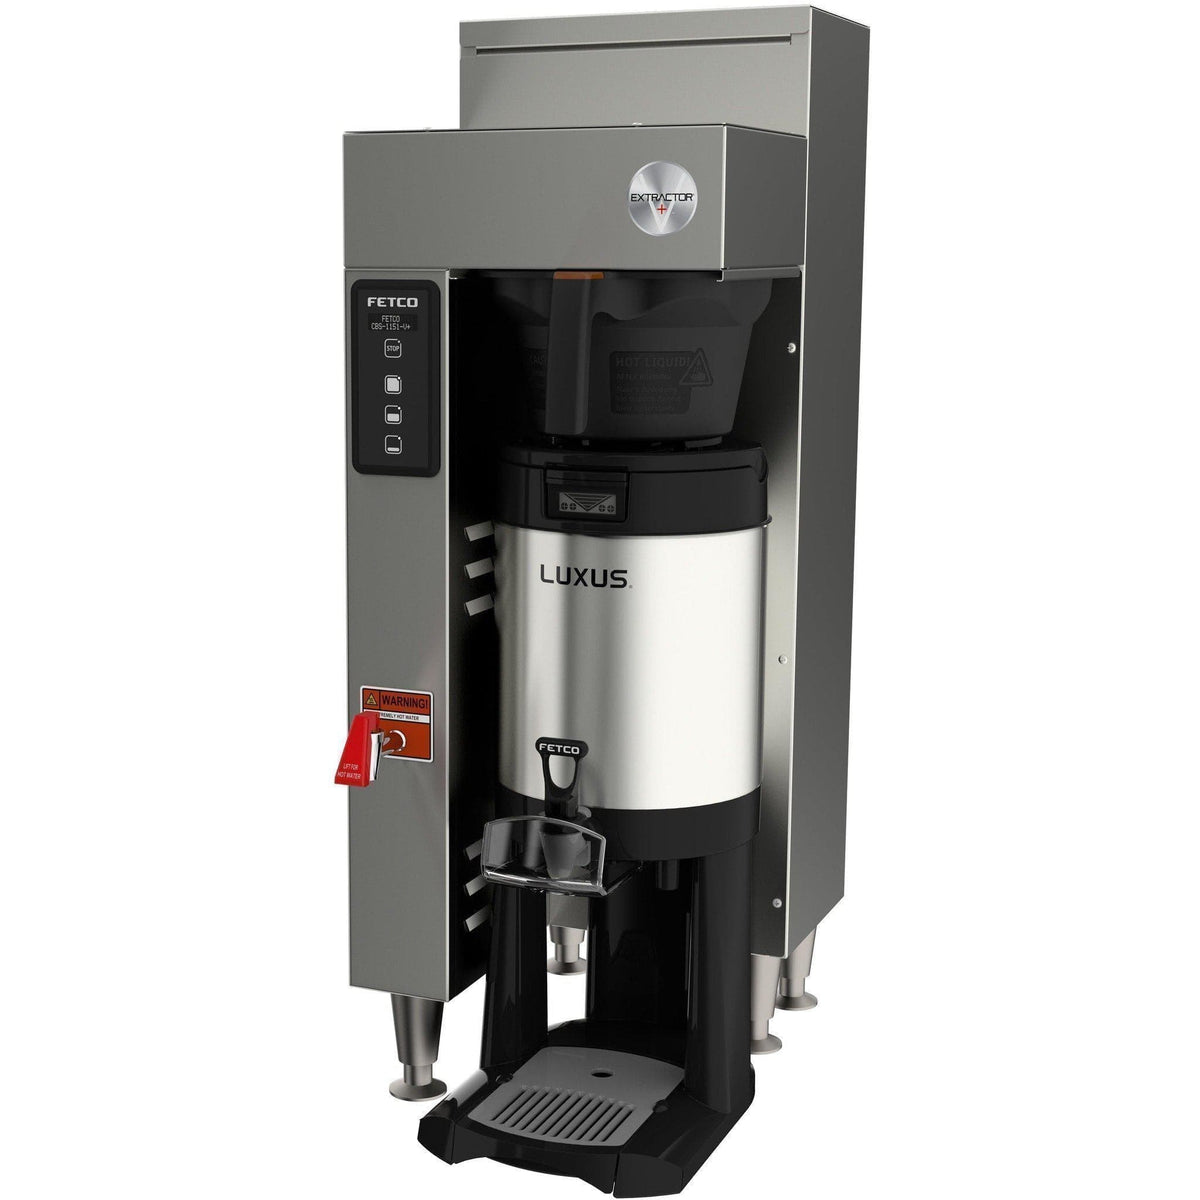 Buy a L4D-20 2 Gallon Fetco Luxus Thermal Coffee Dispenser - Free Shipping